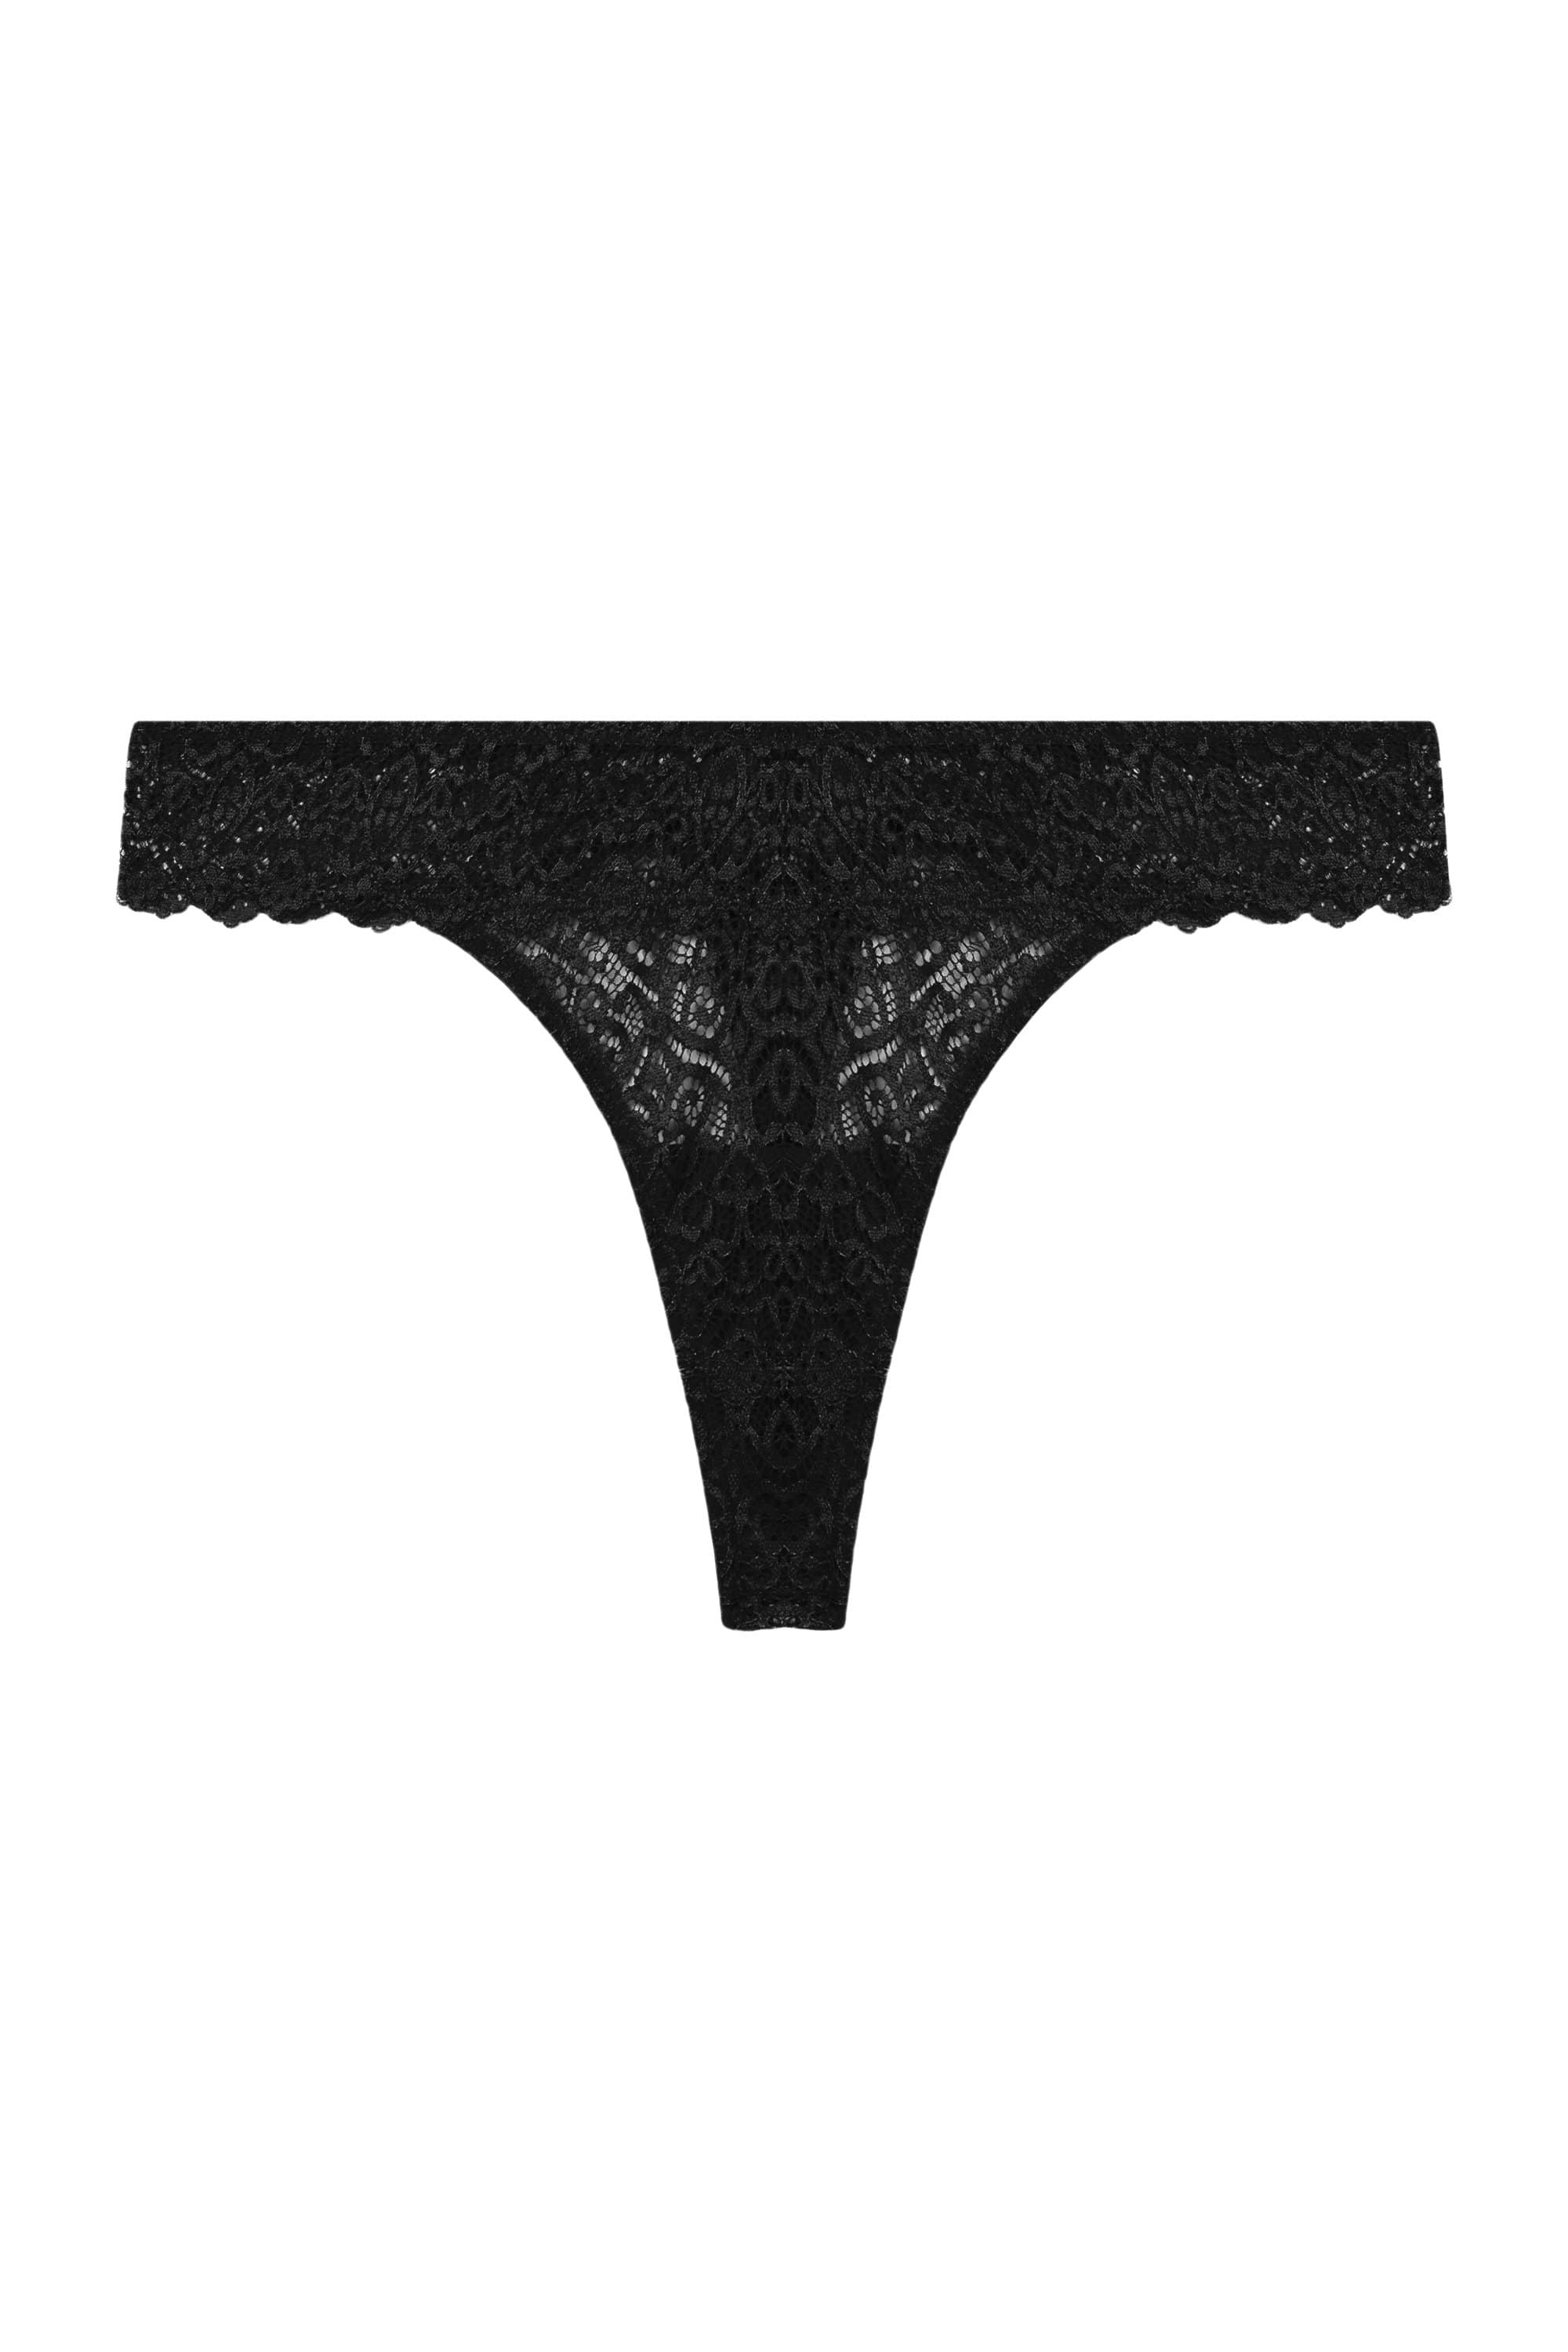 Ariana Black Everyday Lace Thong